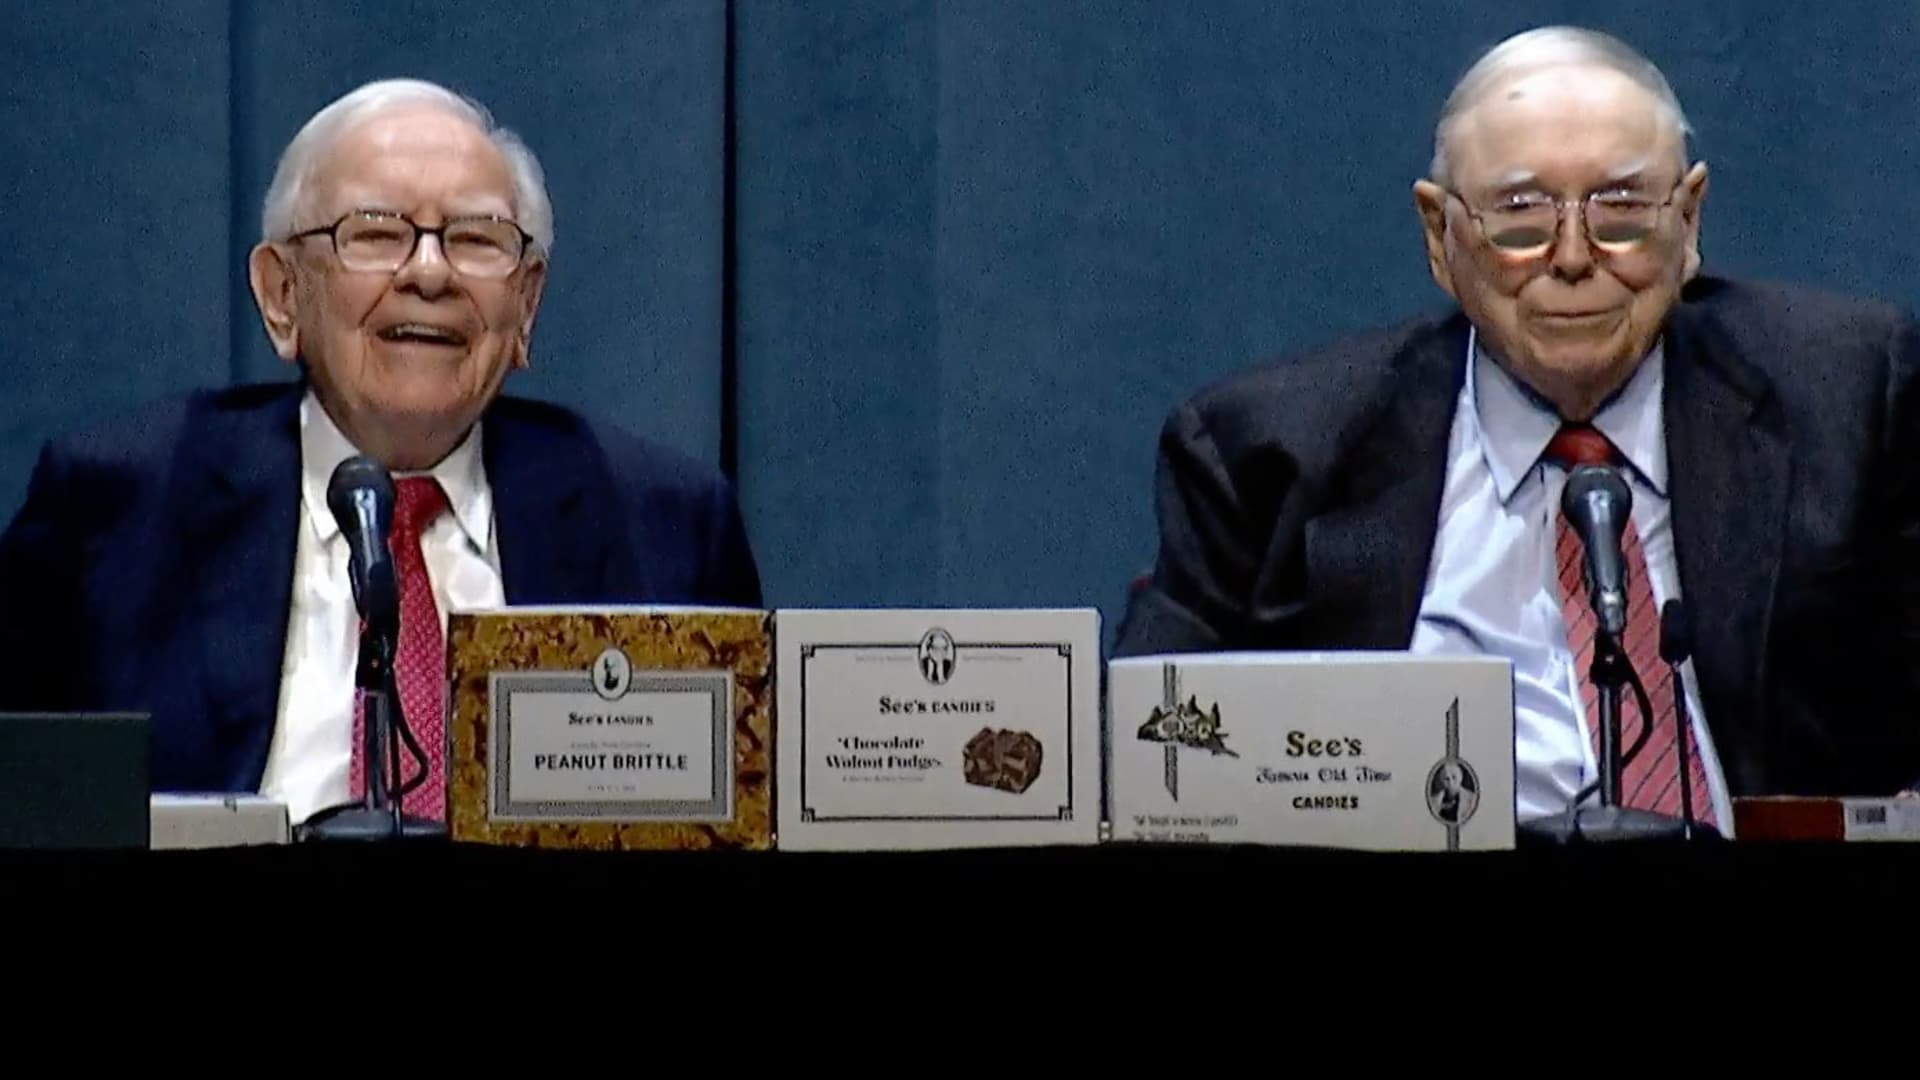 What can you learn from the investment experience of Warren Buffett
source https://www.cnbc.com/2023/02/14/here-are-warren-buffetts-latest-moves-to-the-berkshire-hathaway-stock-portfolio.html